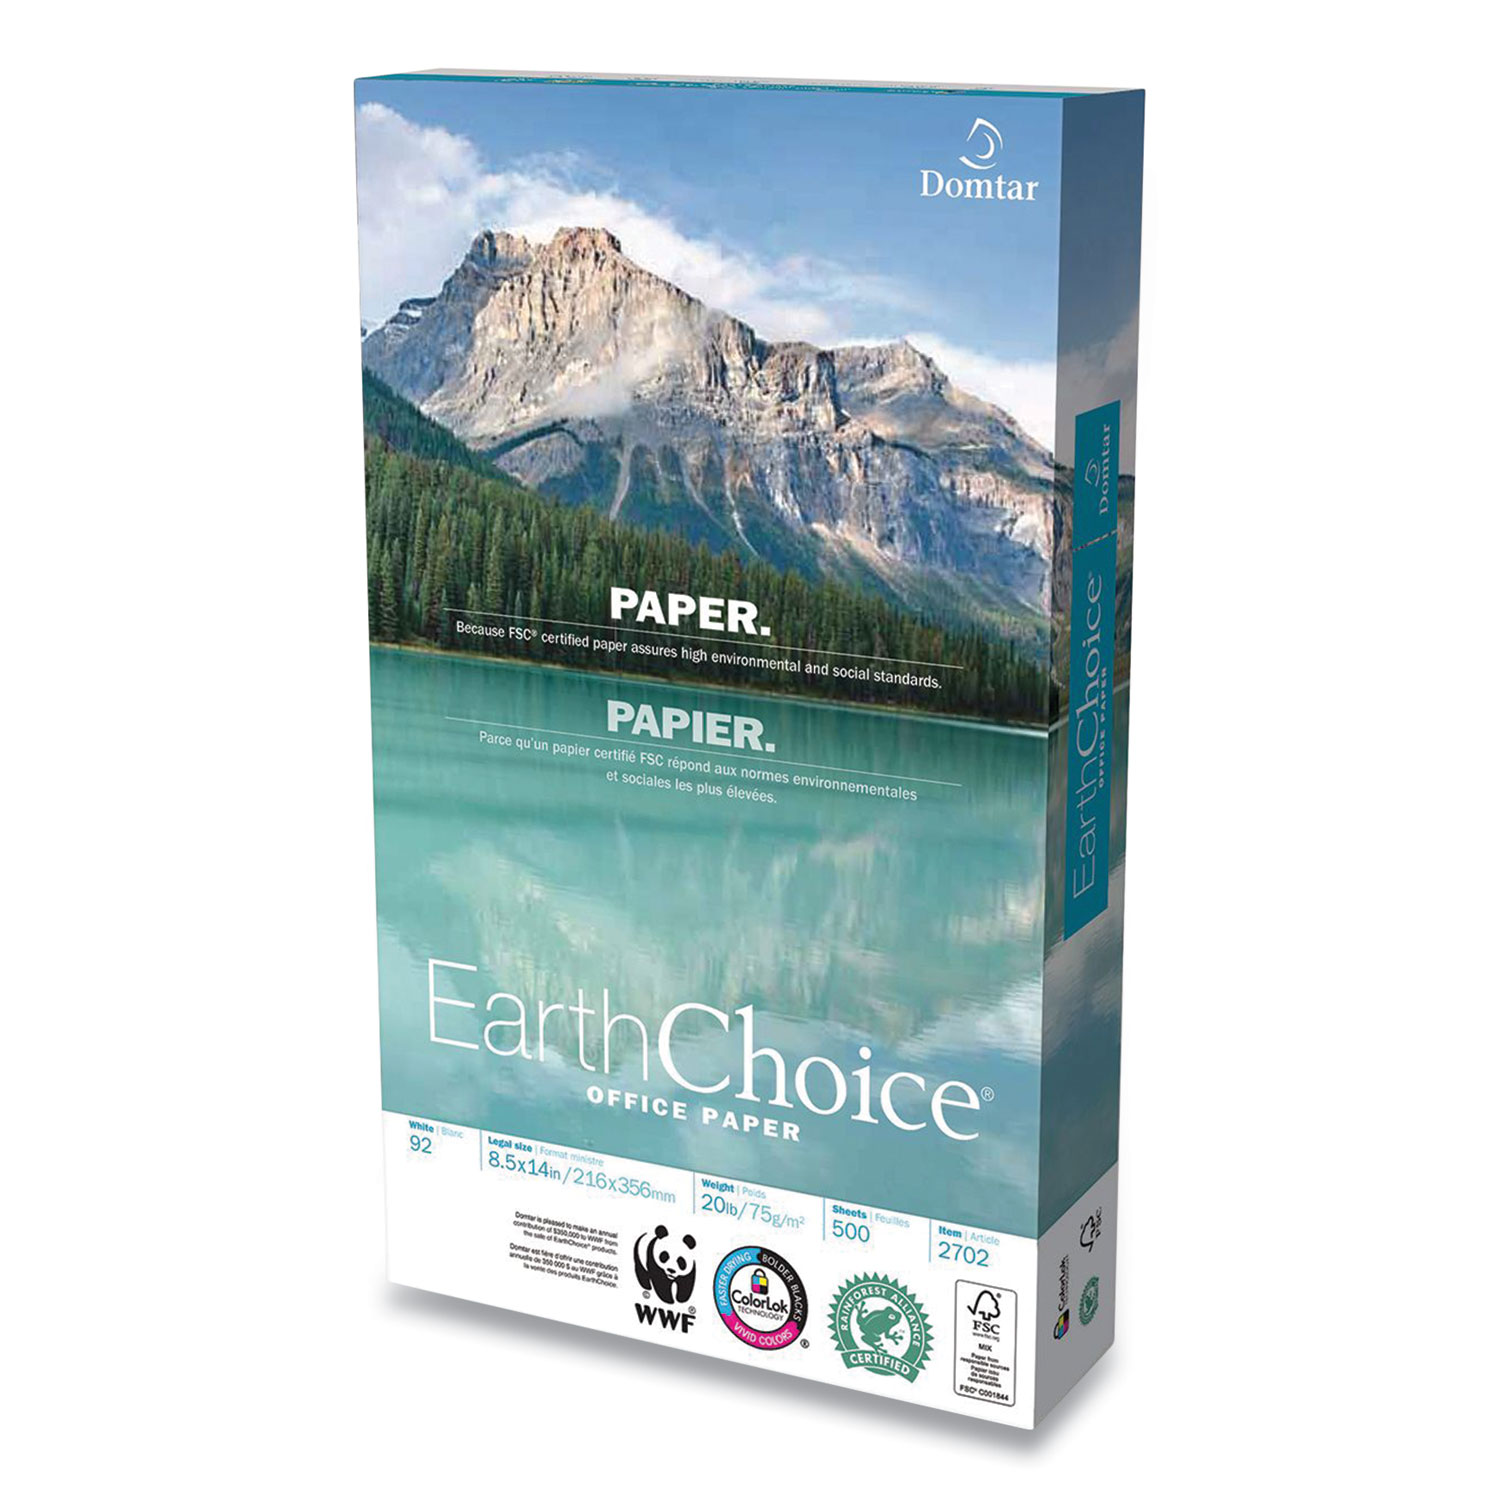 Domtar EarthChoice Office Paper, 92 Bright, 20 lb, 8.5 x 14, White, 500/Ream